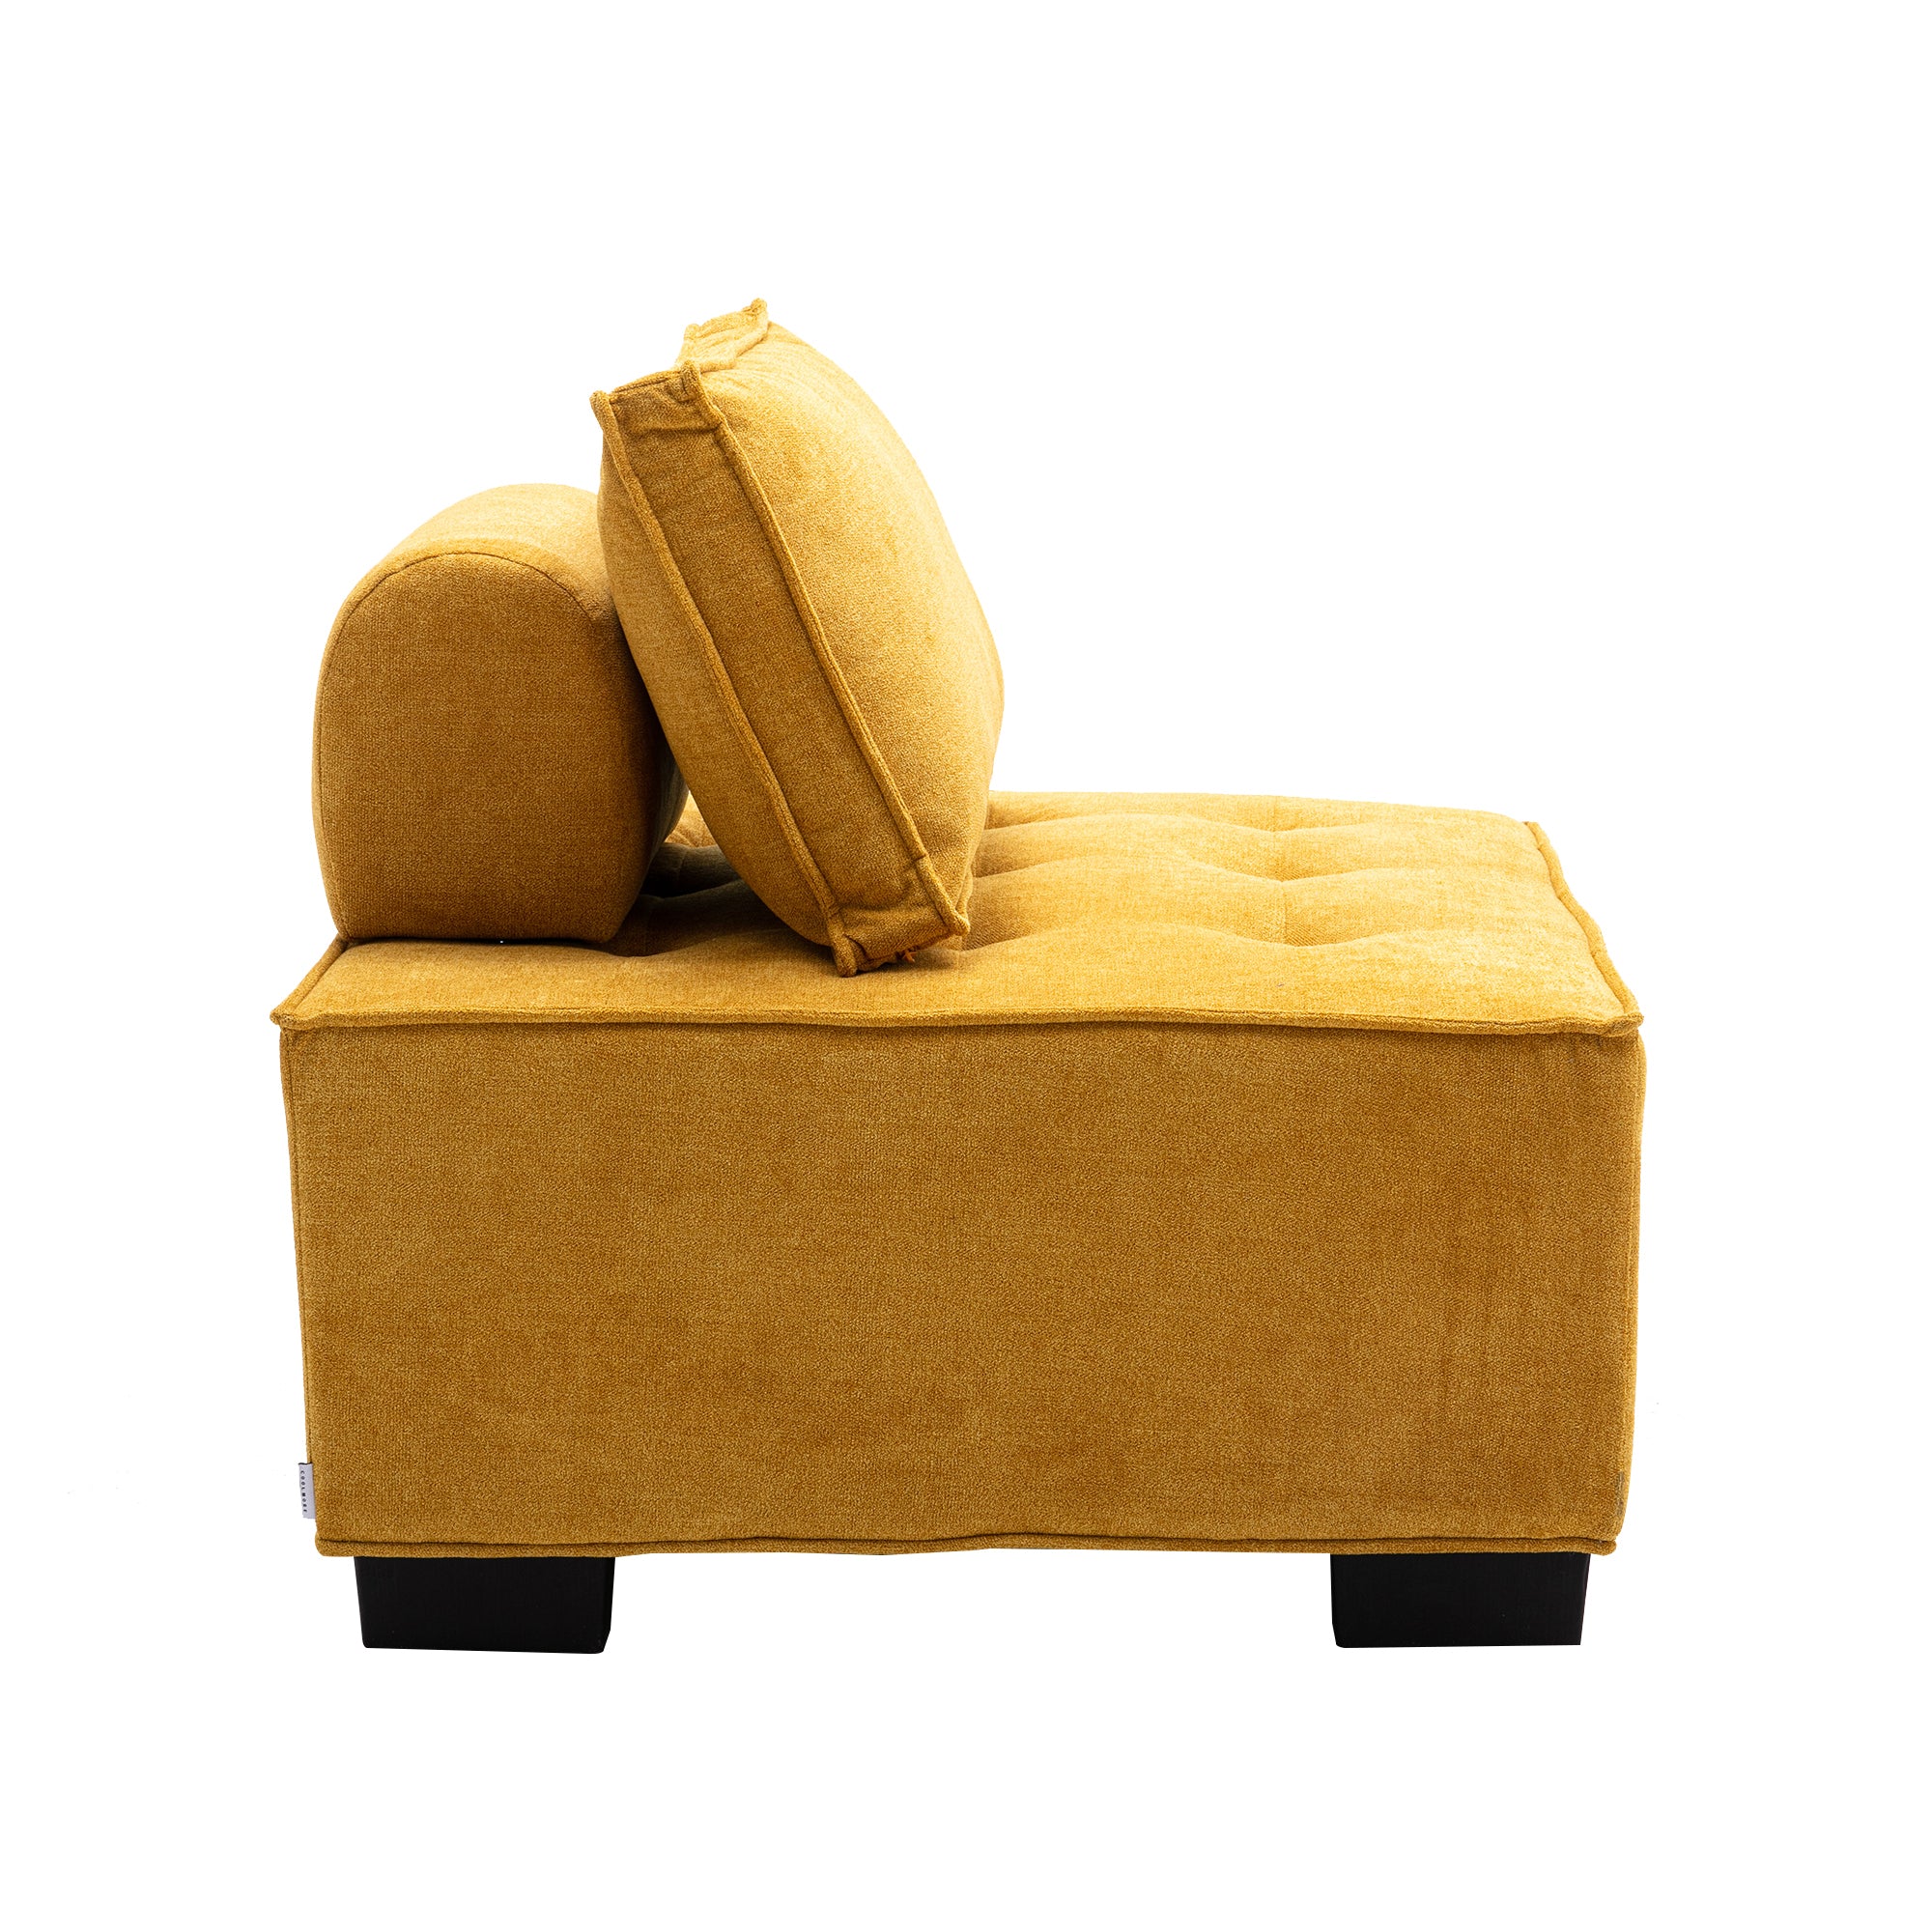 COOMORE LIVING ROOM OTTOMAN LAZY CHAIR yellow-polyester